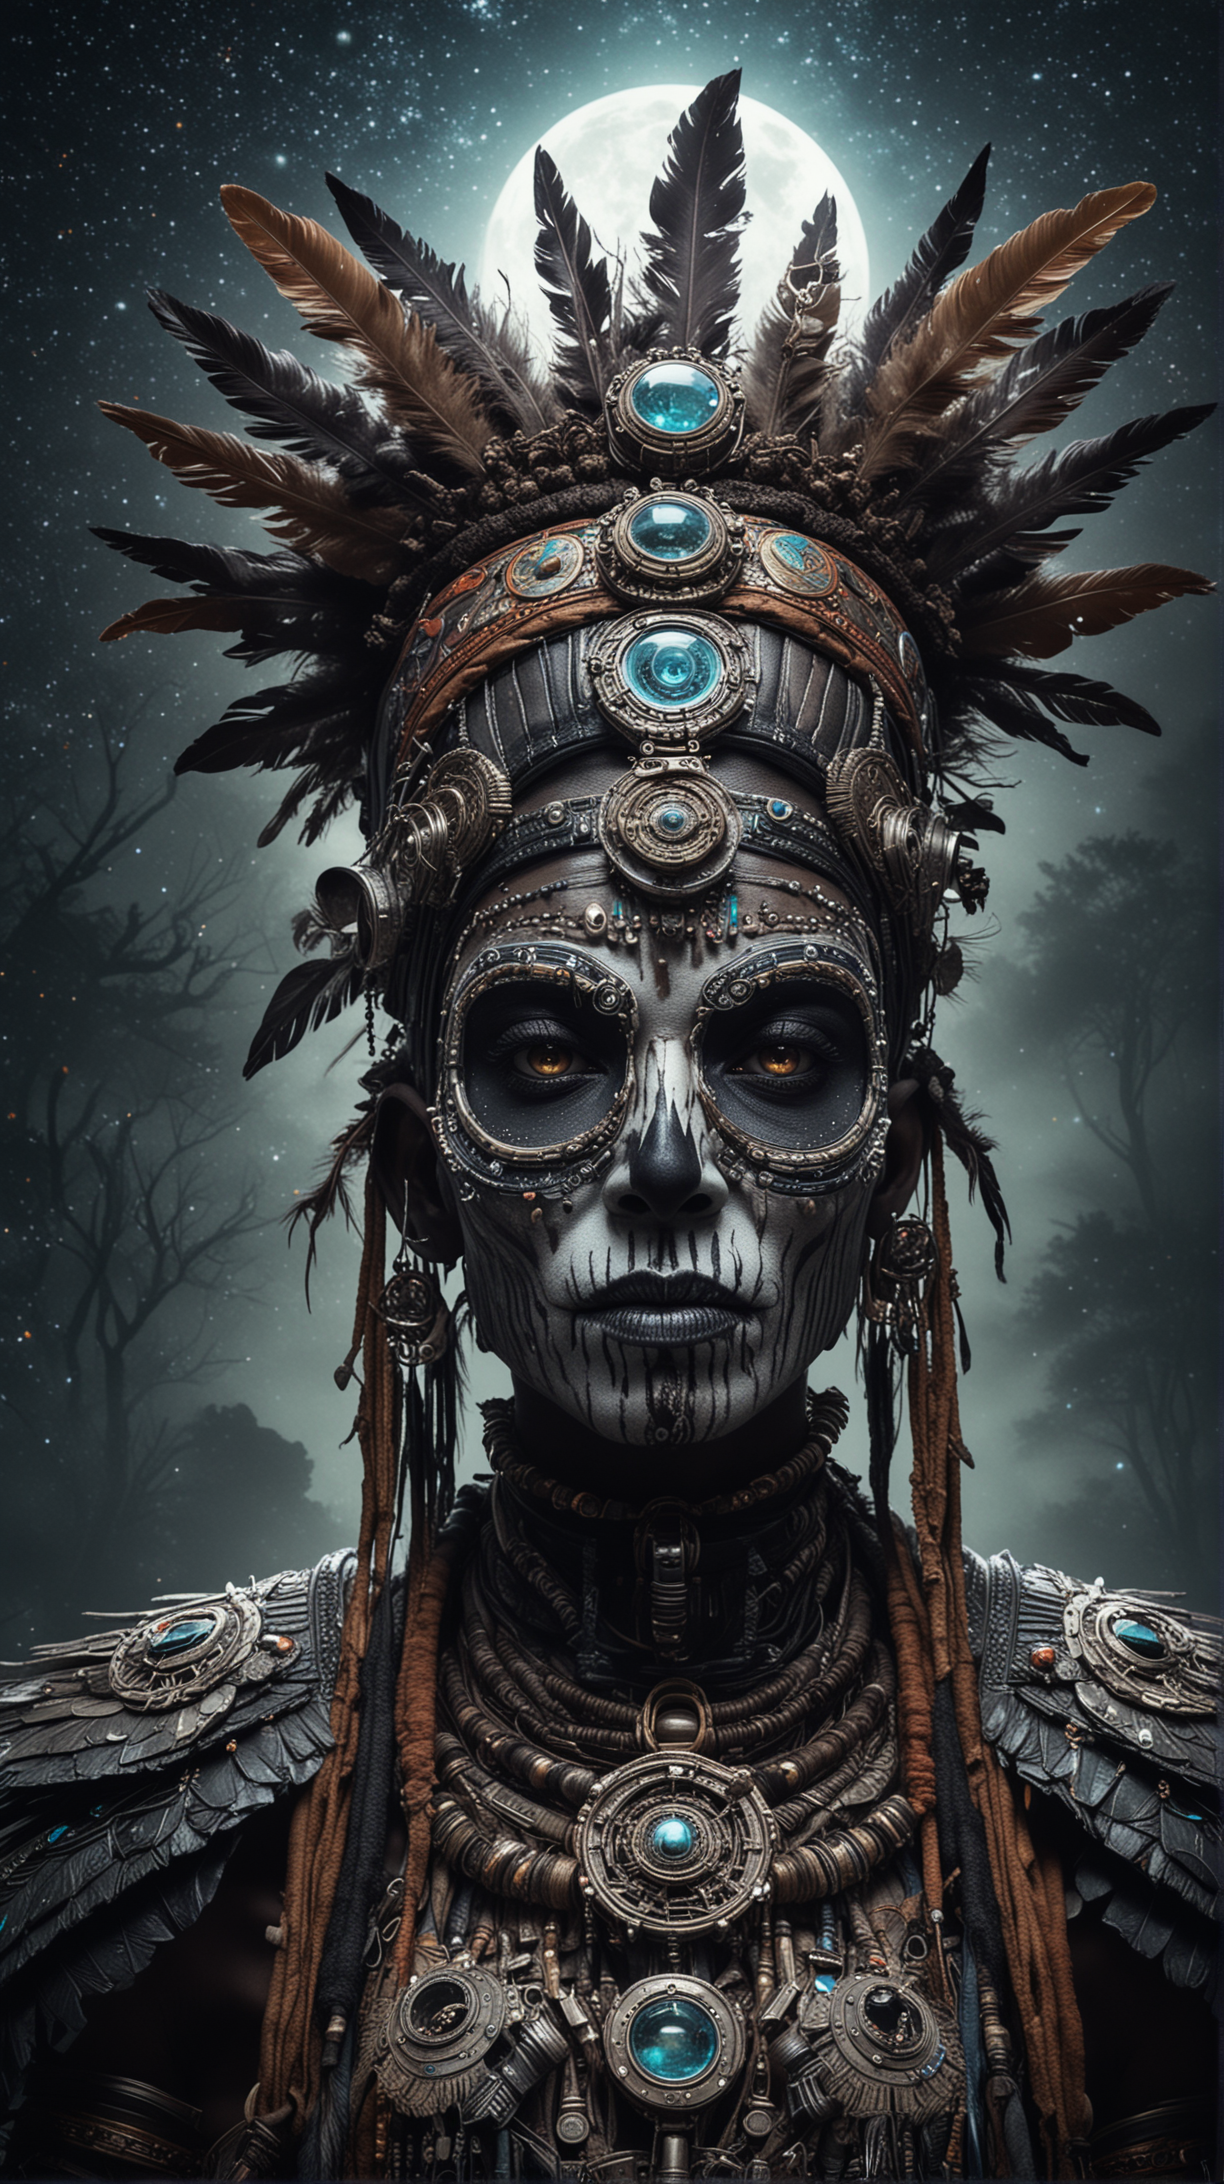 A portrait of a undead witch doctor with a futuristic and artistic theme. The individual has a dark headress. They wear oversized, elaborate goggles that look like they are made of bone, intricate engravings , reflecting the nebulous scene of colors. The goggles have a detailed, ornate design, reminiscent of a mystical aesthetic. The background is a nebulous scene with starry lights, suggesting a lush forest at night. The person’s skin should have a rough wrinkled quality, reflecting the ambient colors.